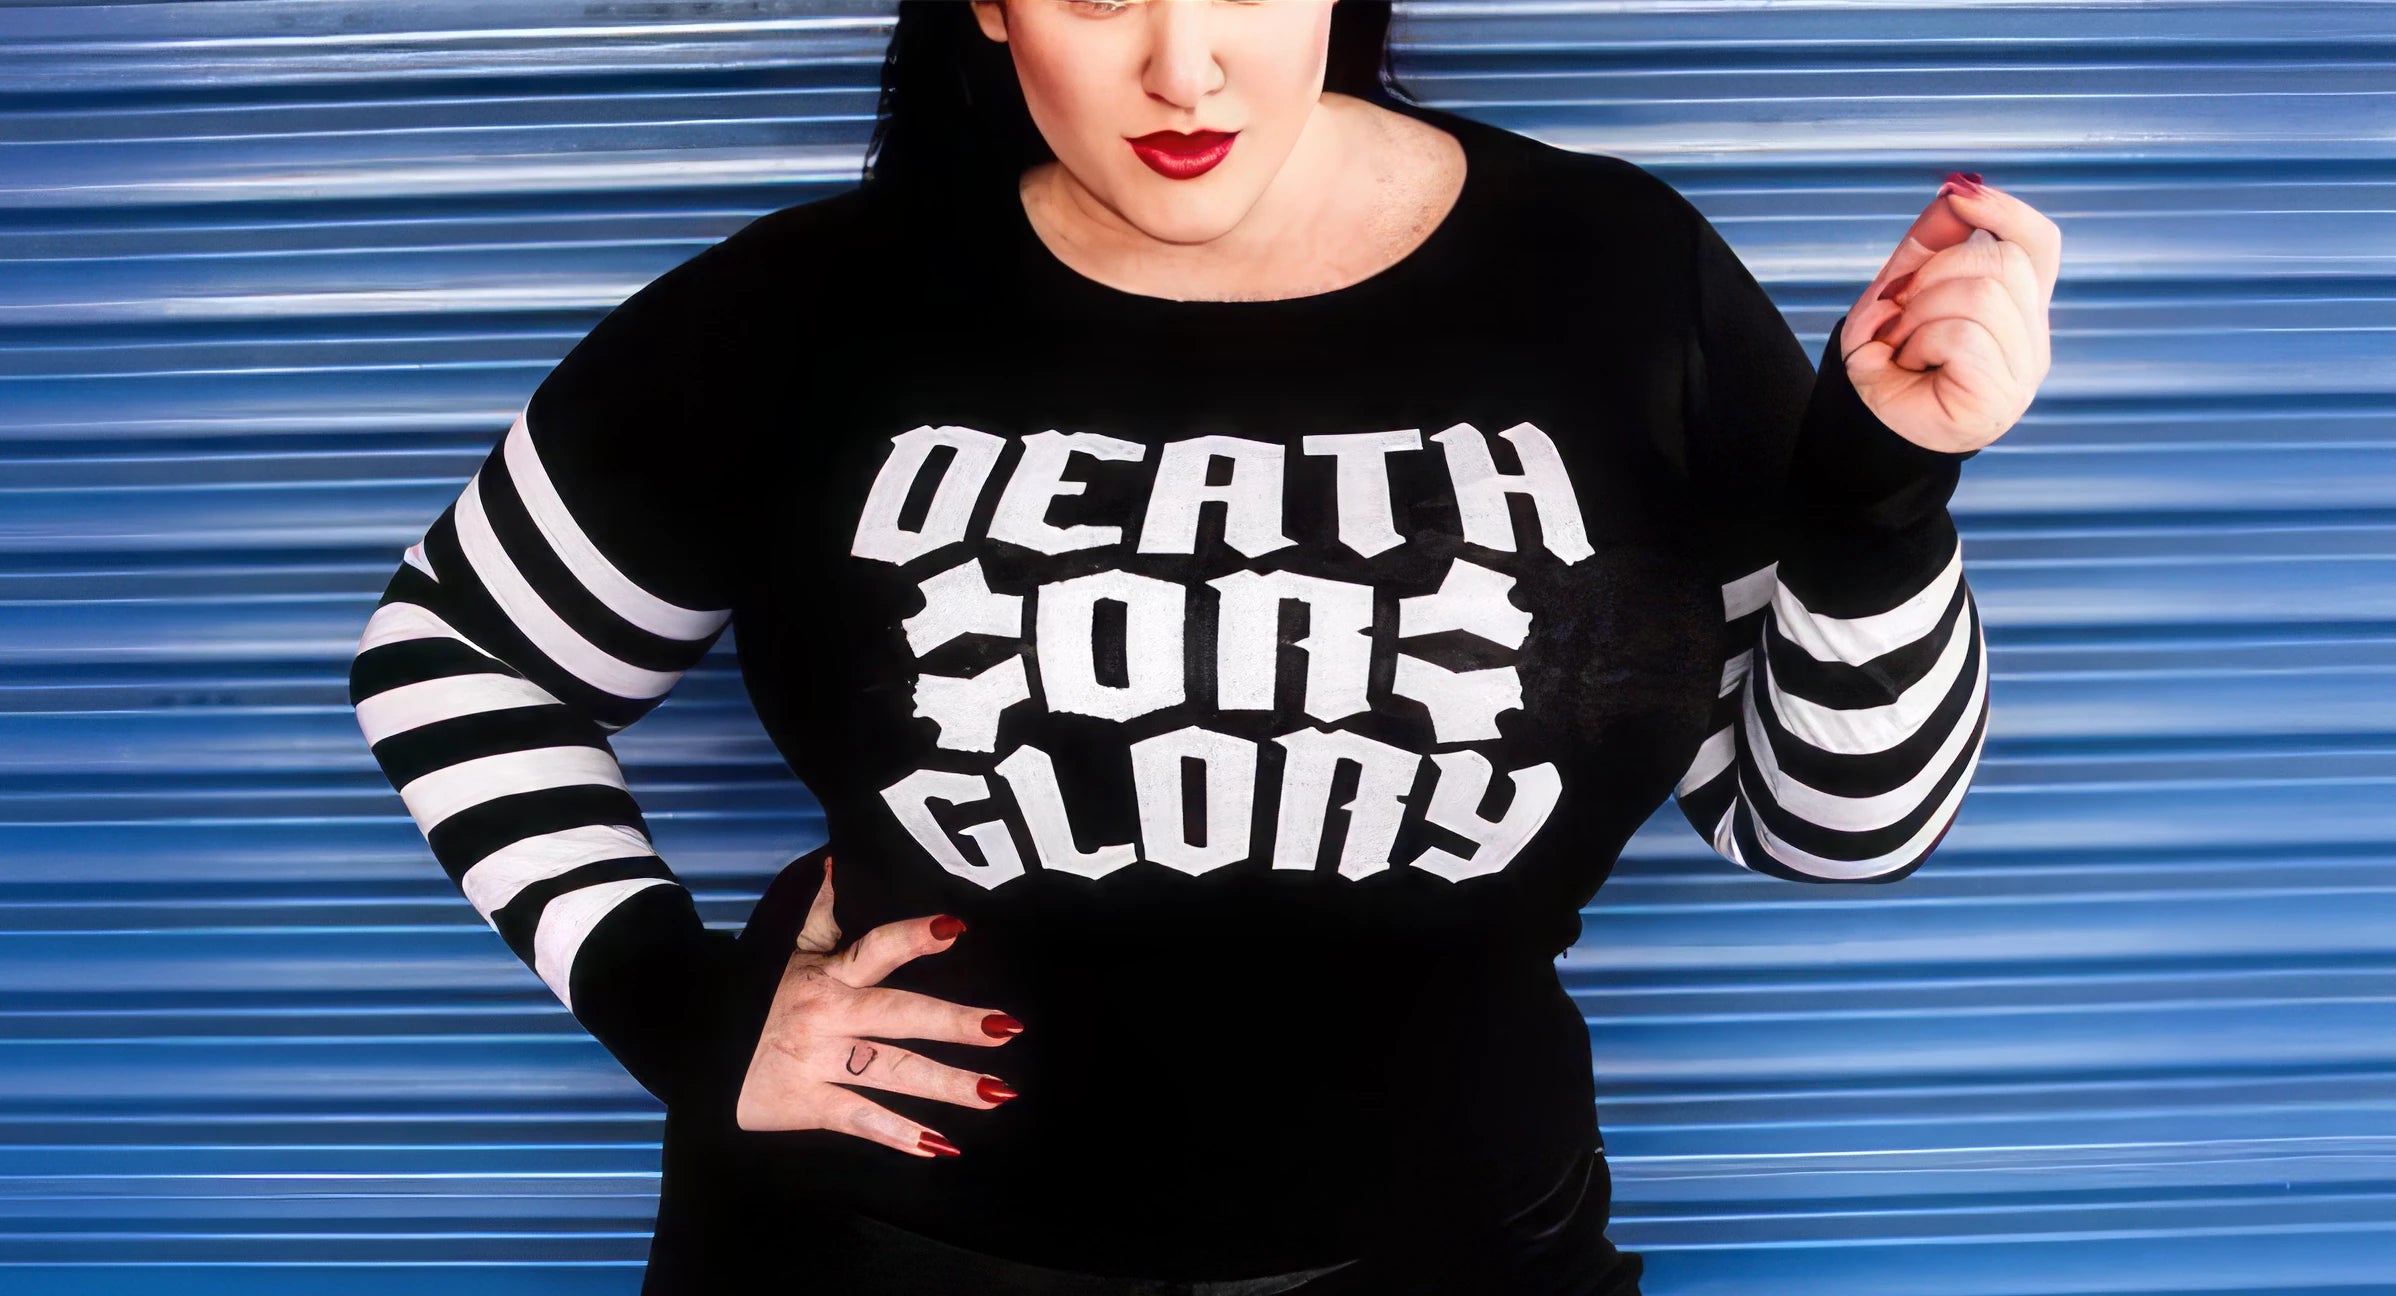 Death or glory Jumper